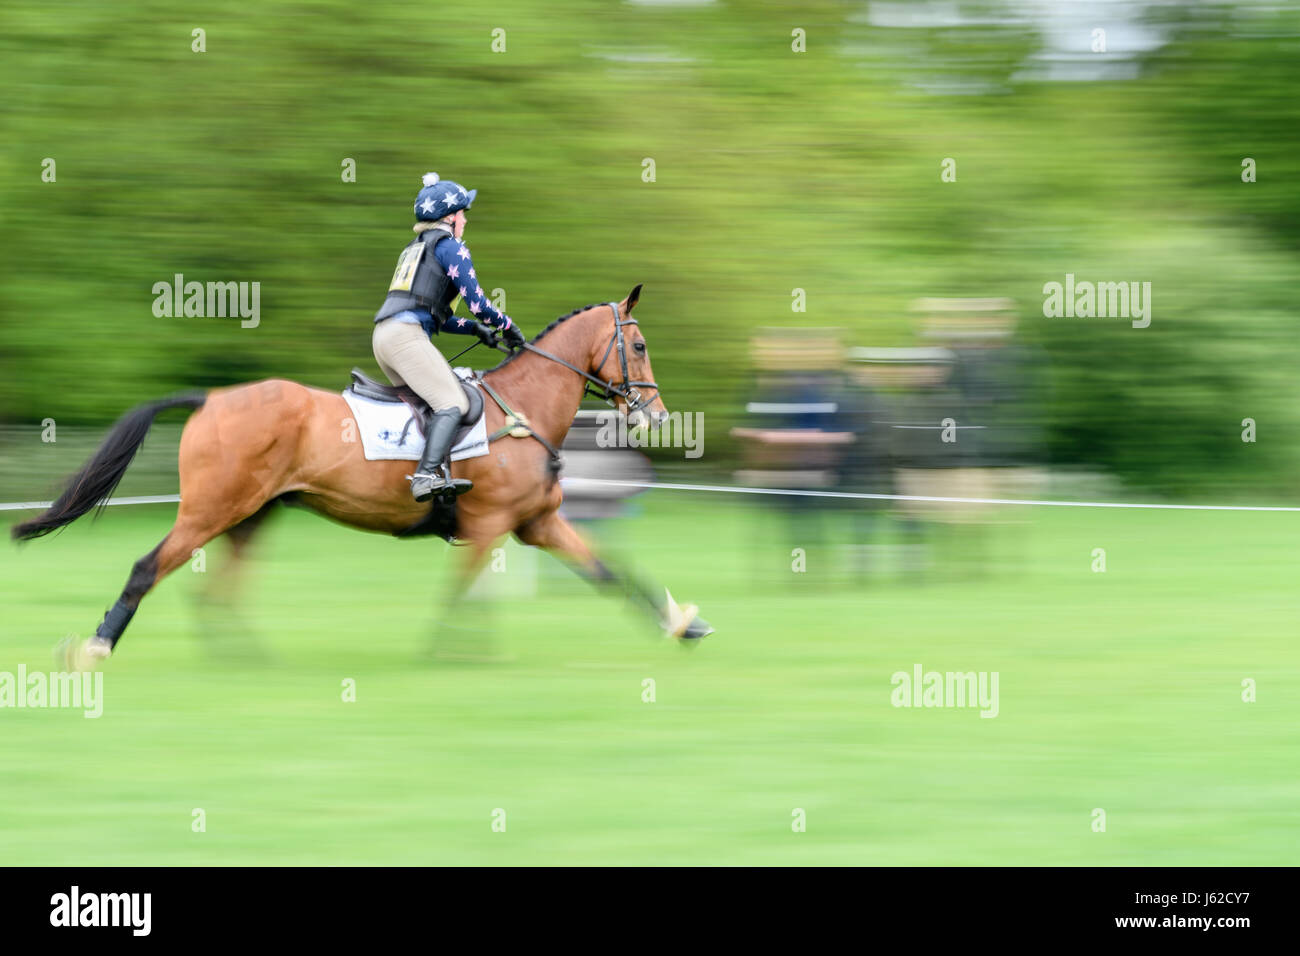 Rockingham Castle grounds, Corby, UK. 19th May, 2017. The horse 'Avocado' ridden by Scarlett Wills hurtles past spectators during the cross country event in the grounds of the Norman Rockingham Castle, Corby, England, on Thursday 19th May 2017. Credit: miscellany/Alamy Live News  Stock Photo